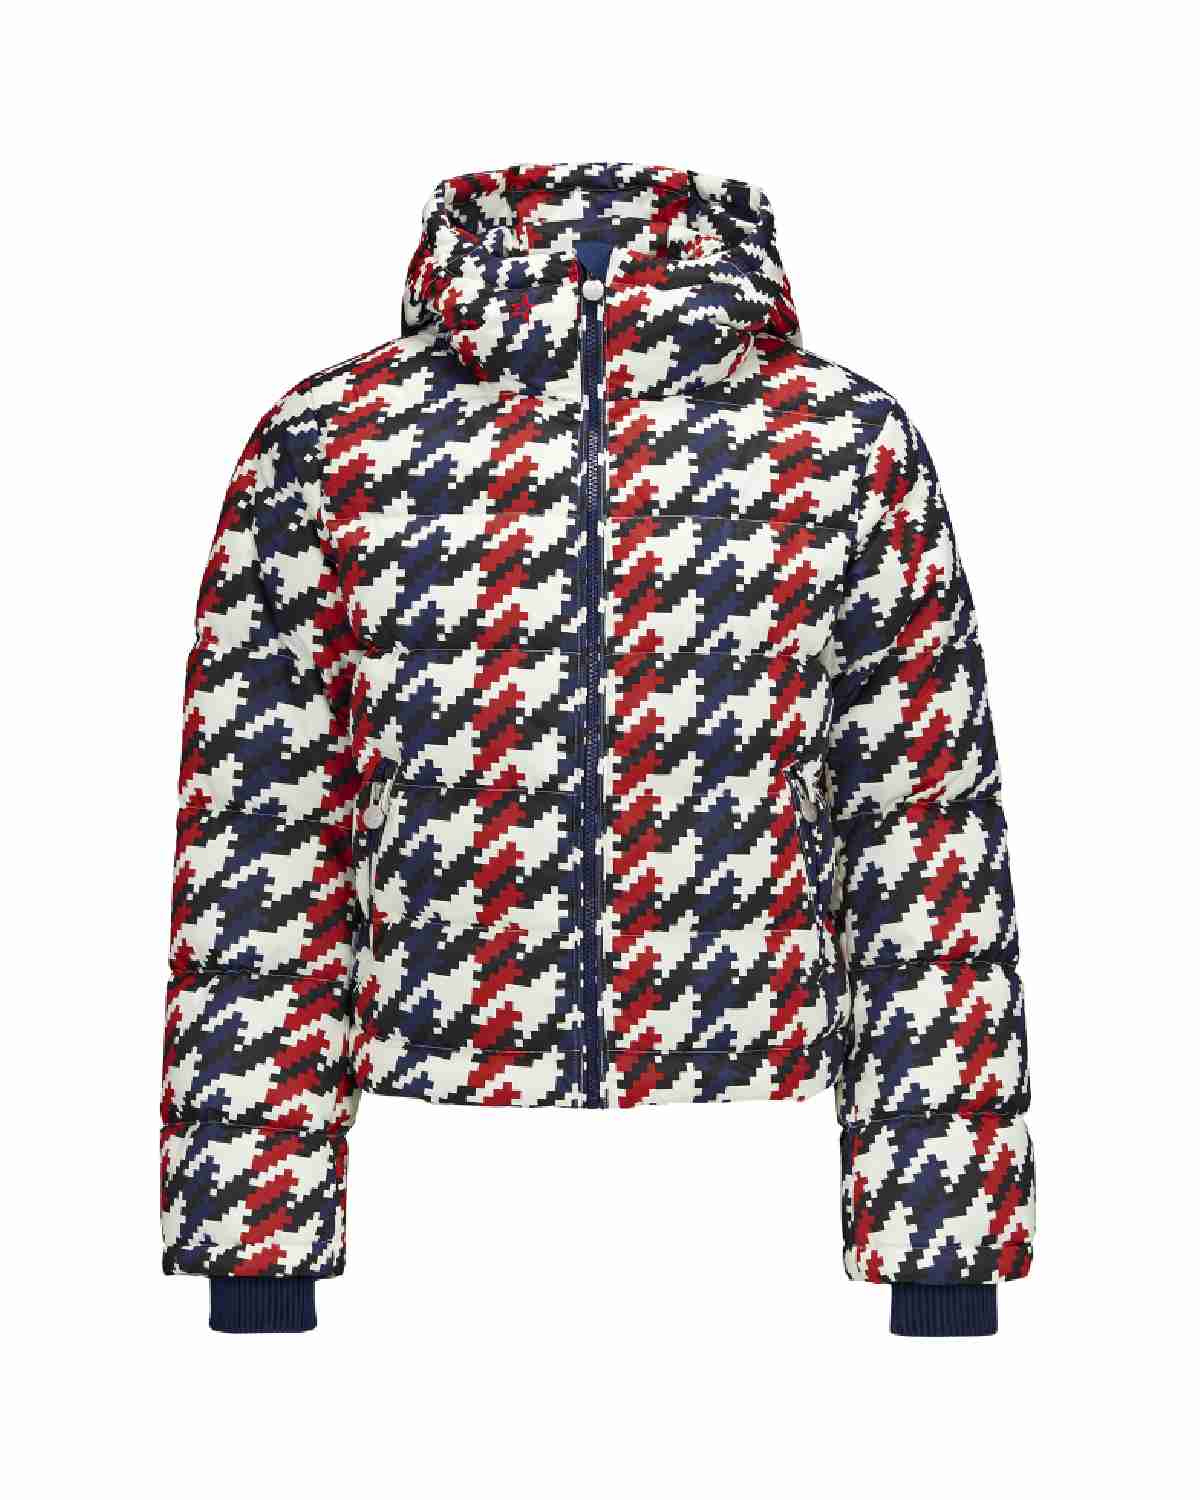 Perfect Moment Women's Houndstooth Polar Flare Ski Jacket - Red, White & Navy